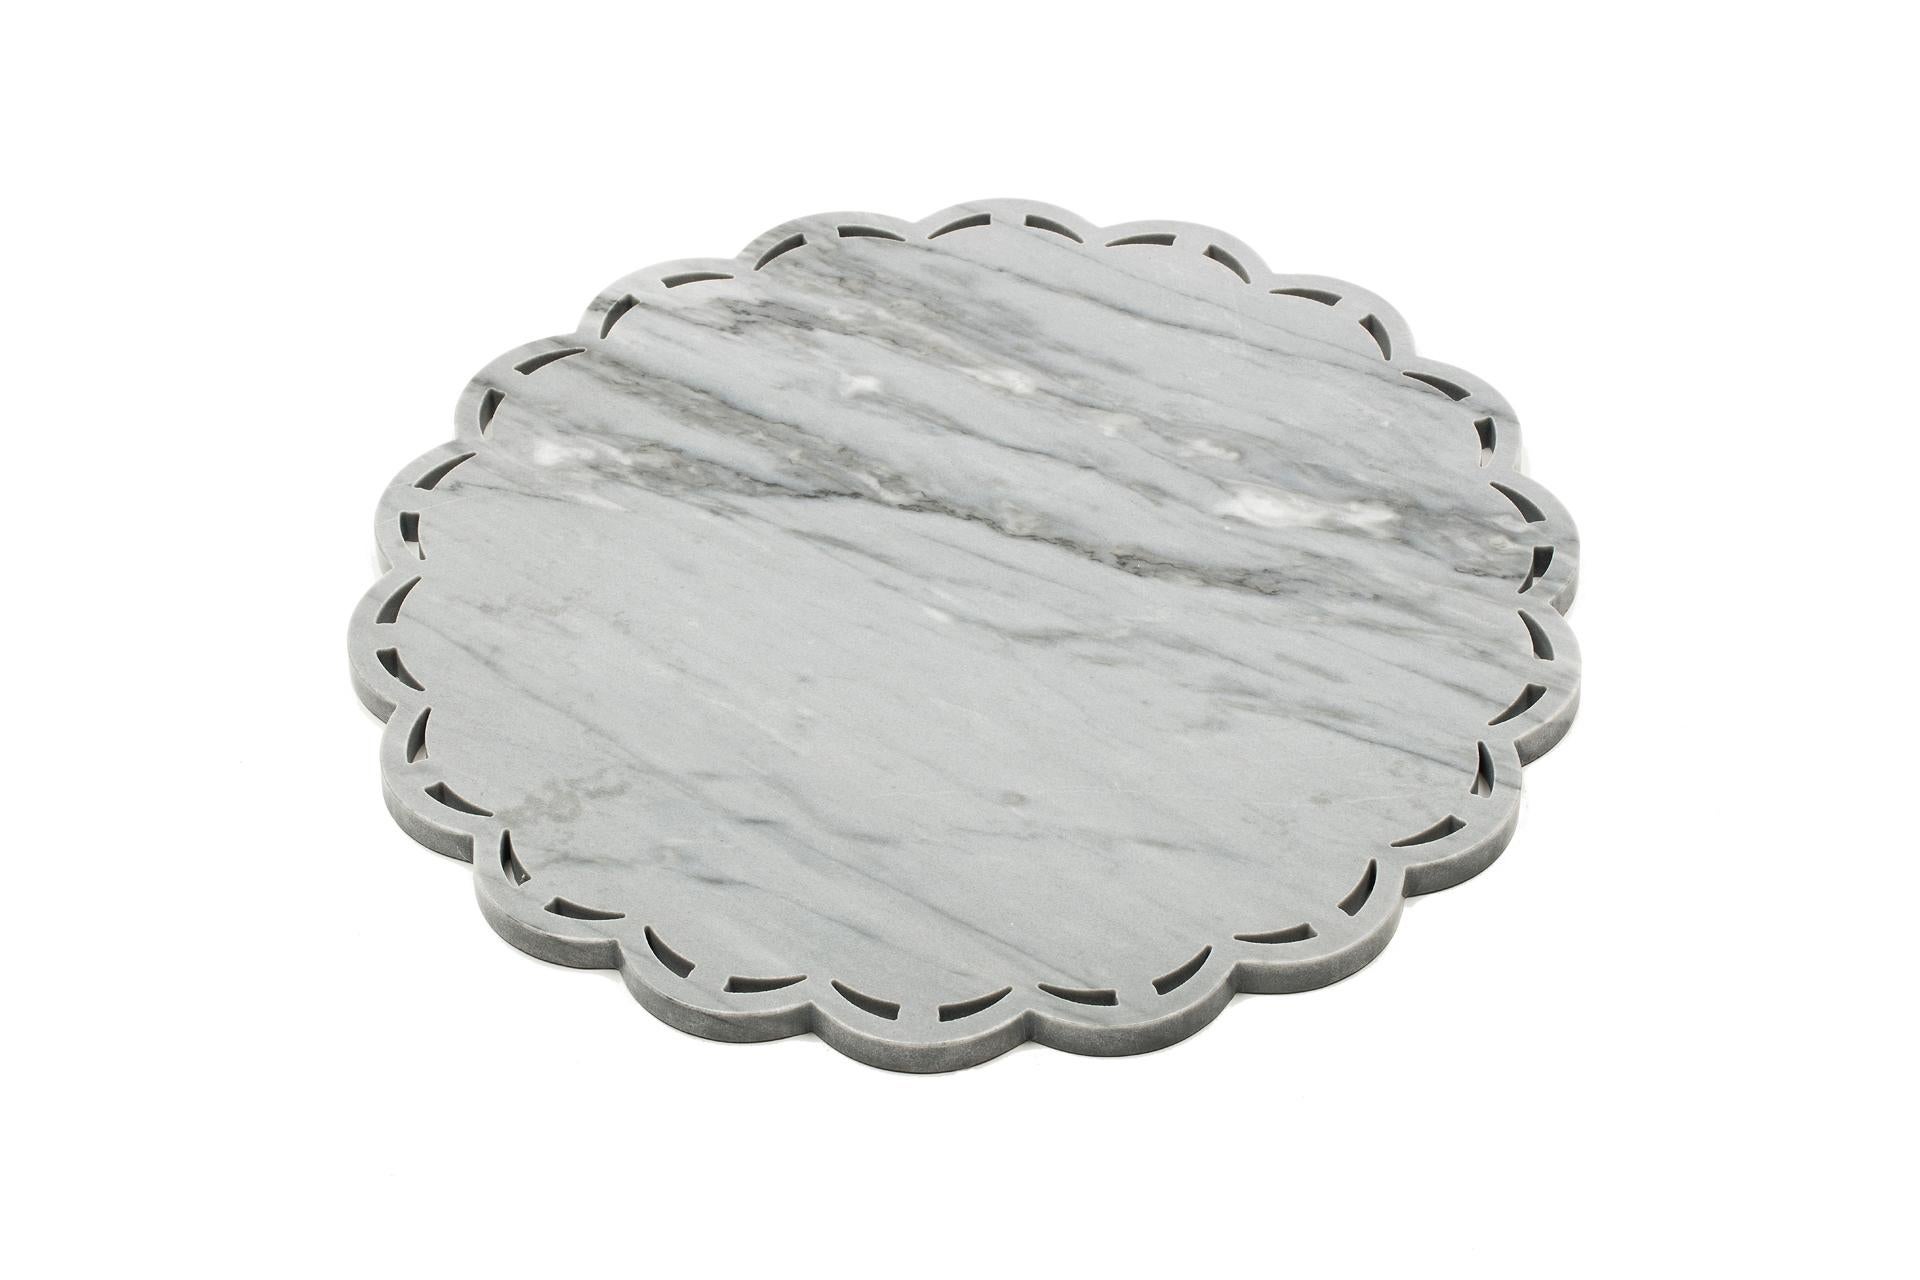 Hand-Crafted Round Marble Tray or Plate with Lace Edge